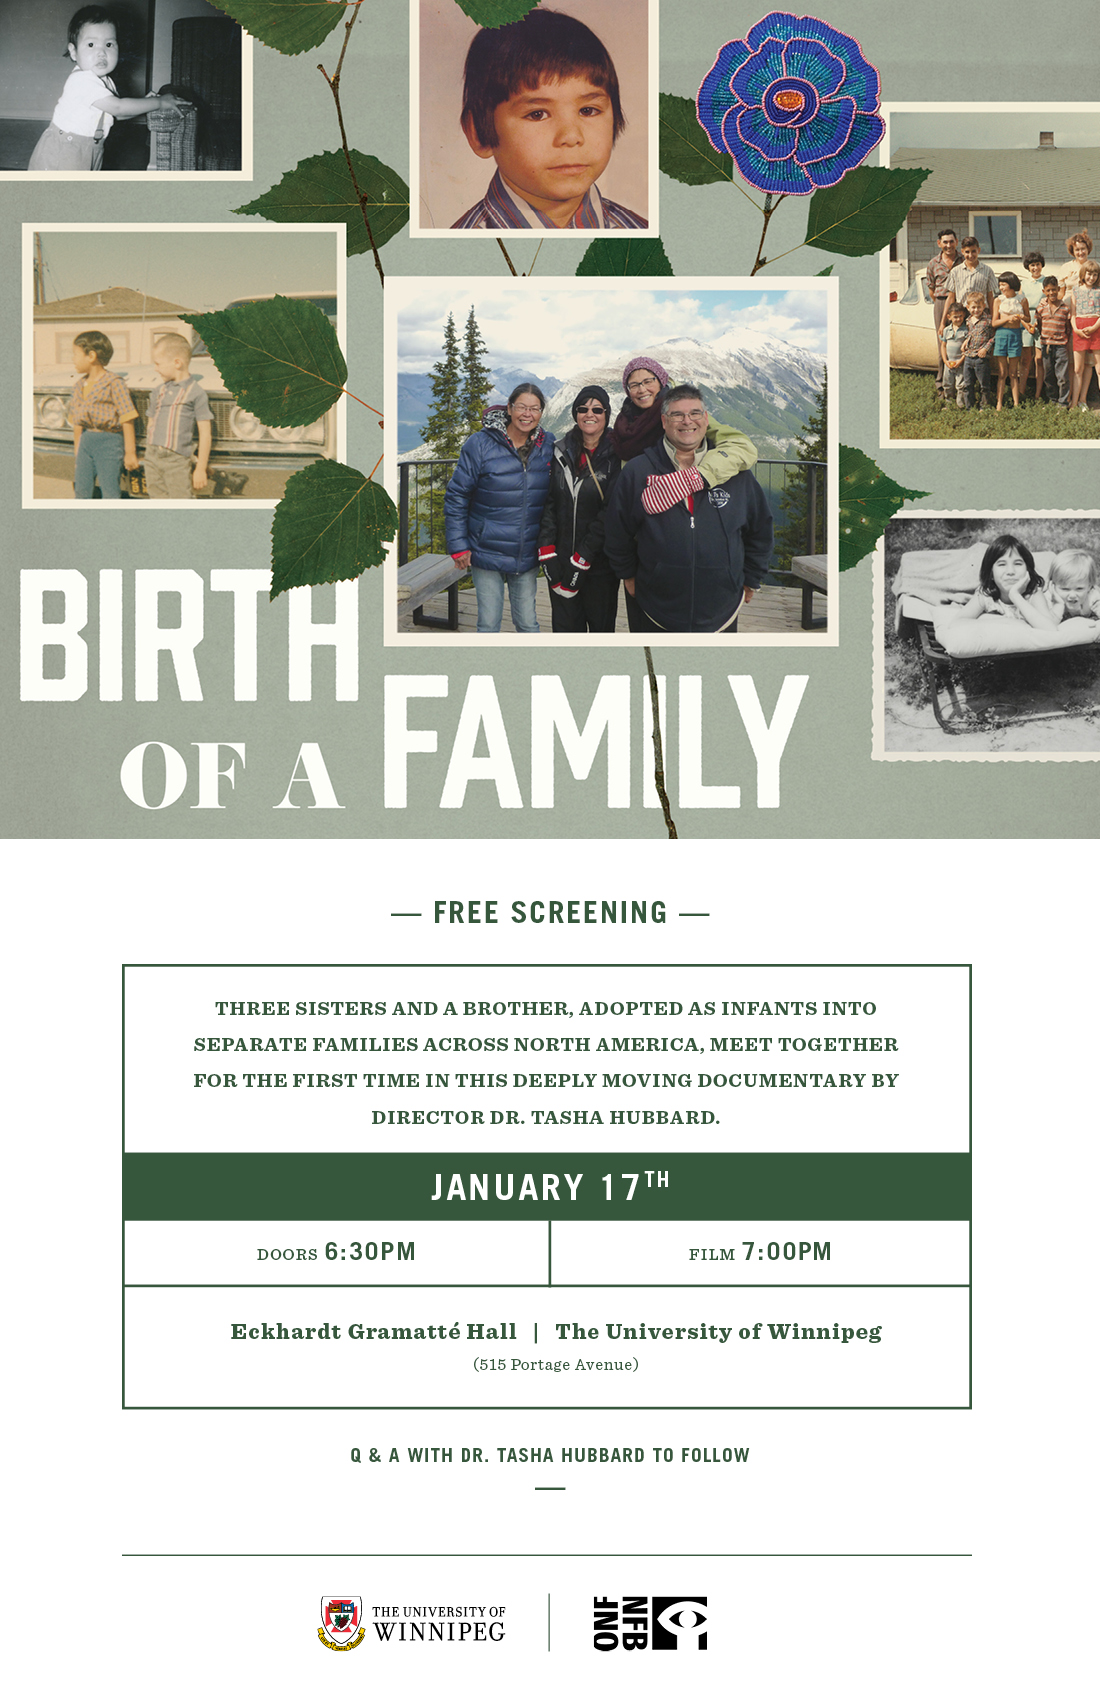 Birth of Family Poster with event details